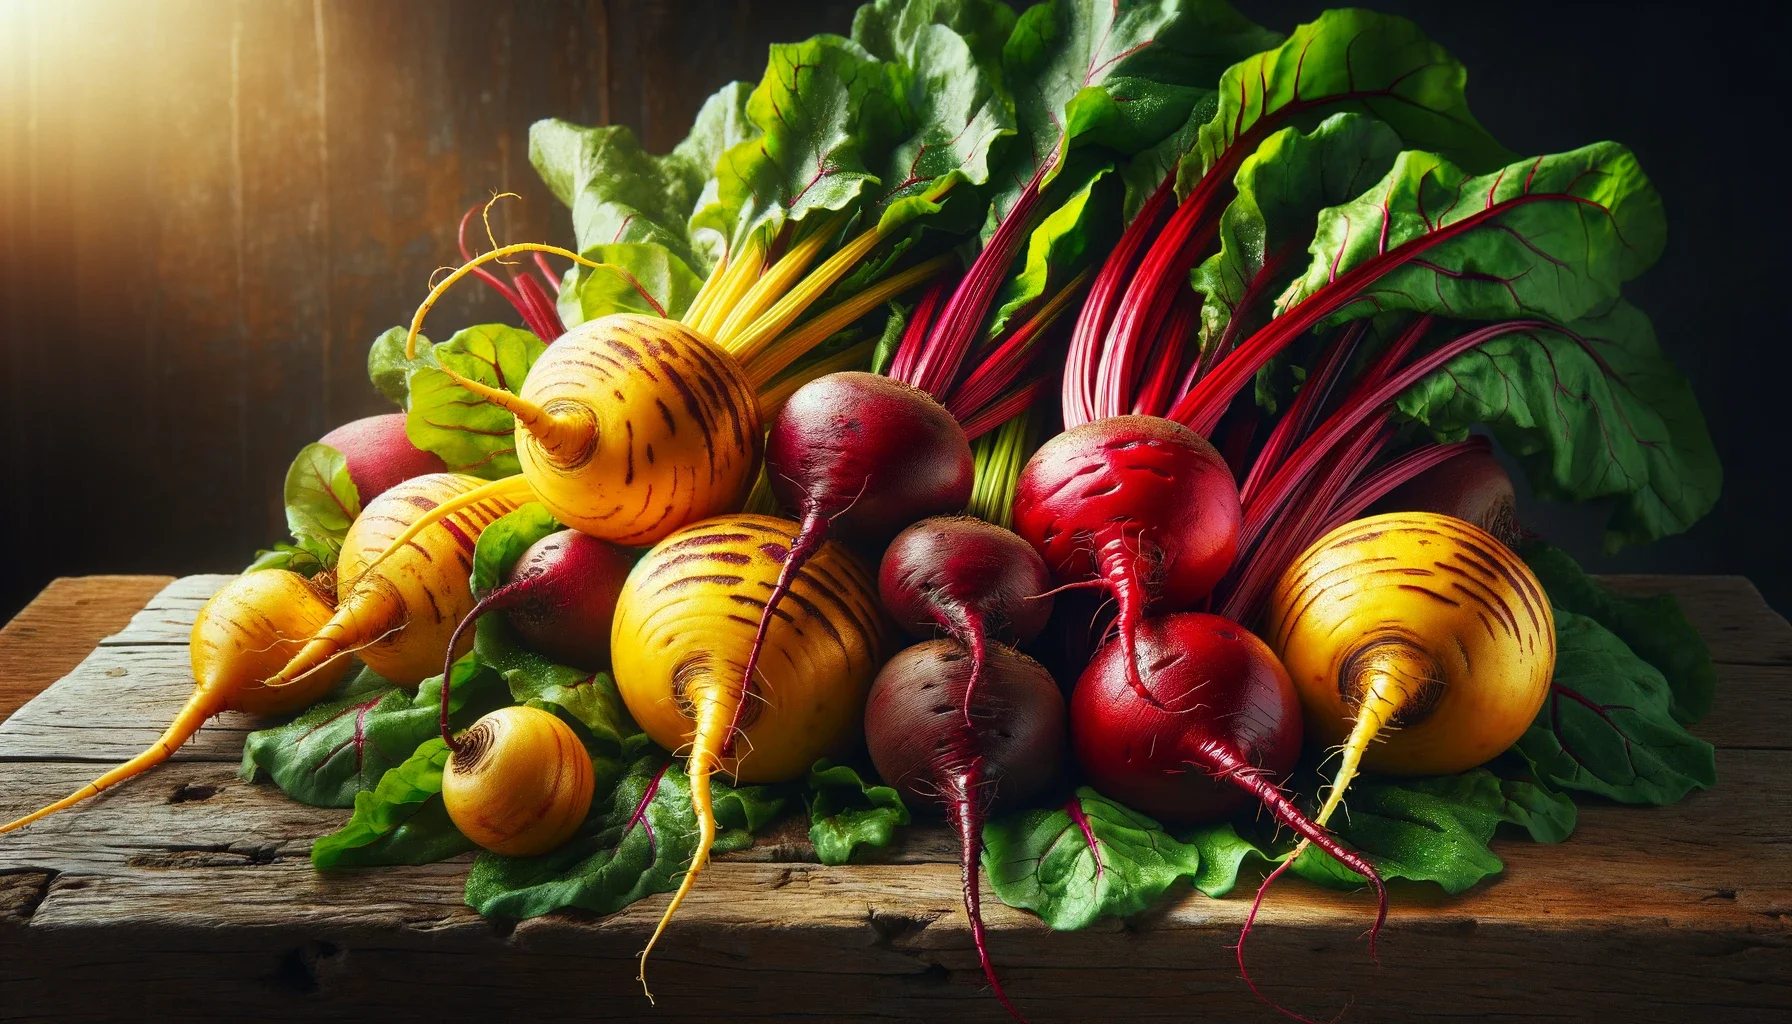 A vibrant and colorful image depicting golden and red beets in a dynamic and visually appealing composition.